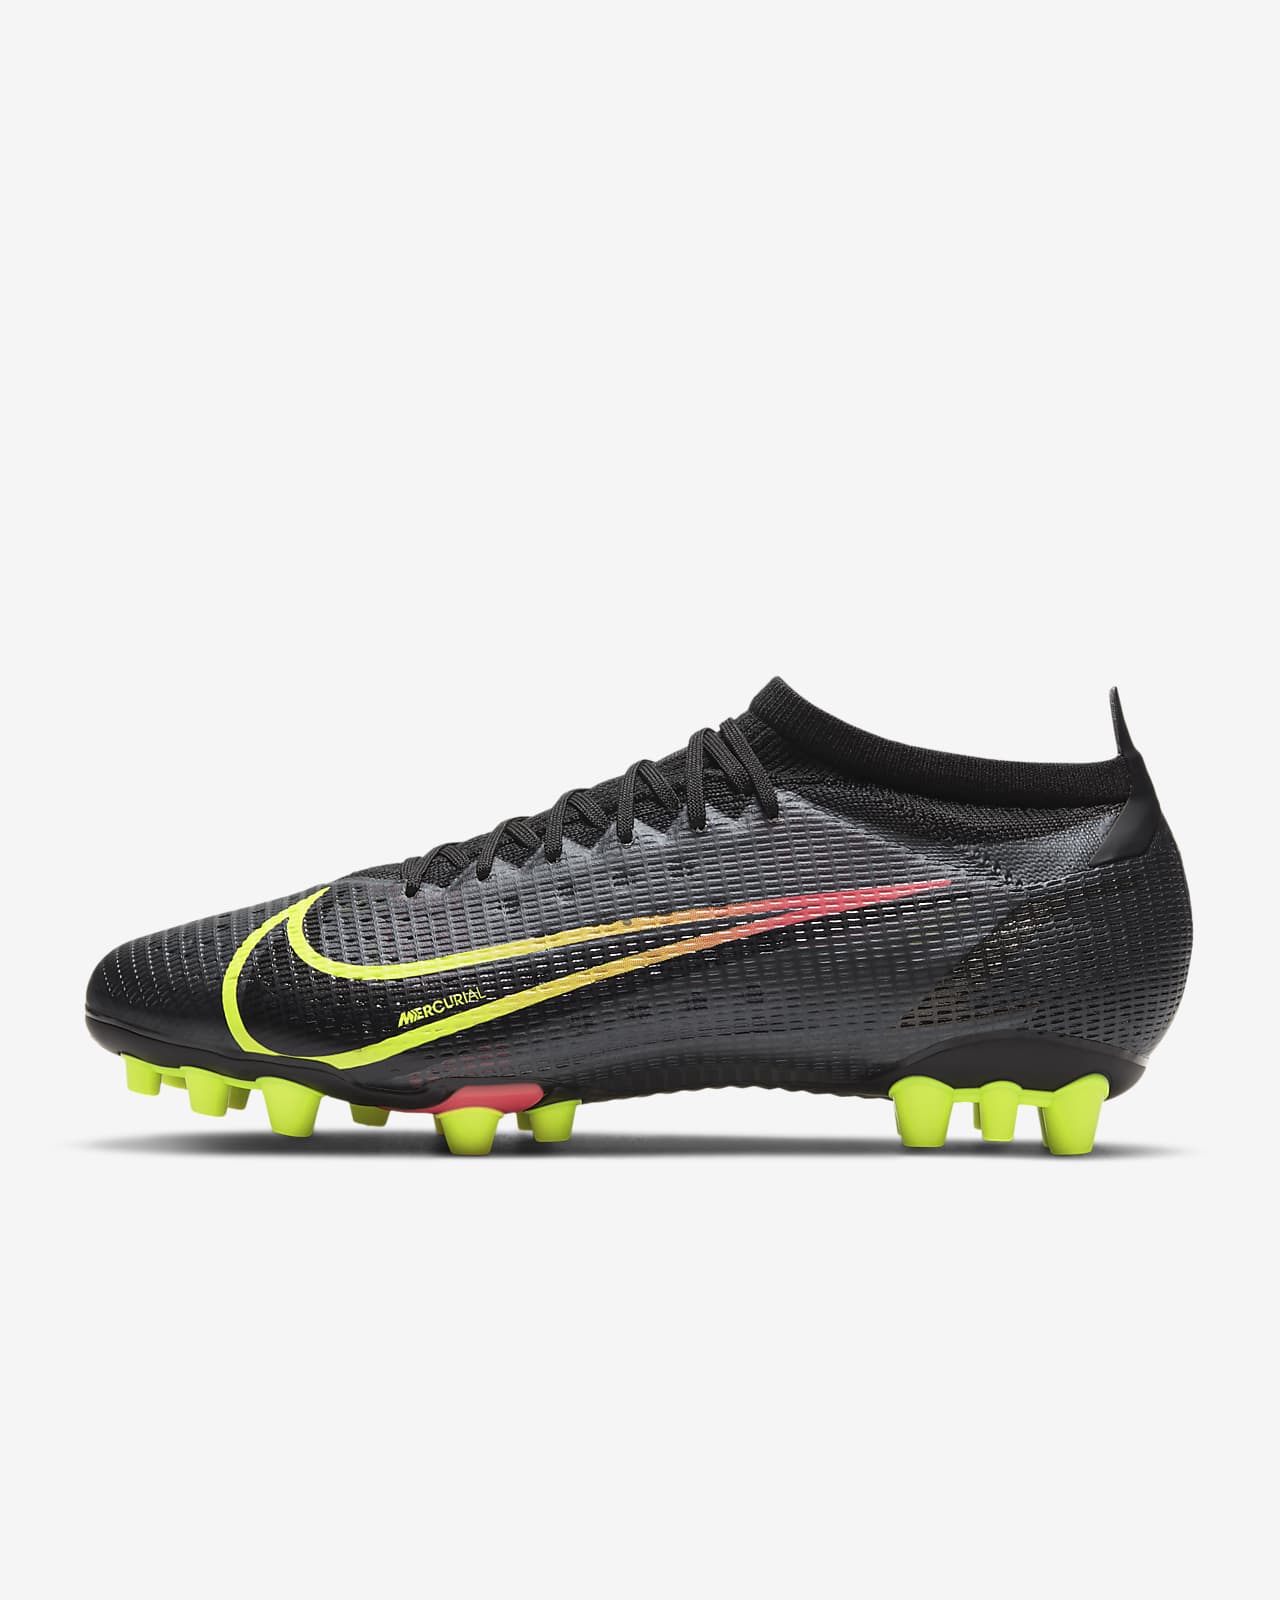 nike mercurial vapour football boots